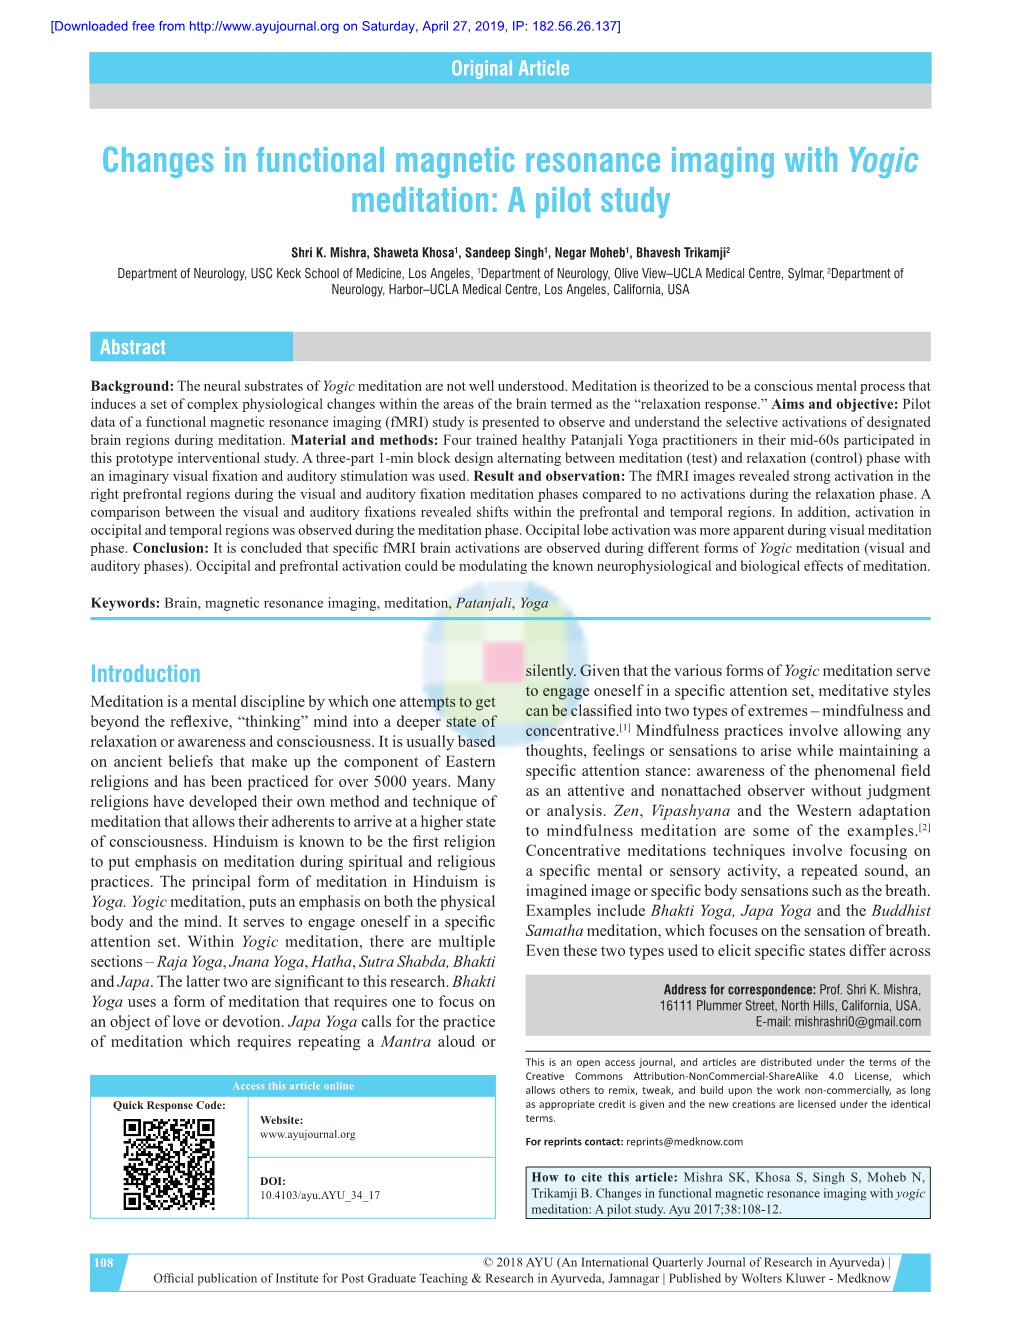 Changes in Functional Magnetic Resonance Imaging with Yogic Meditation: a Pilot Study